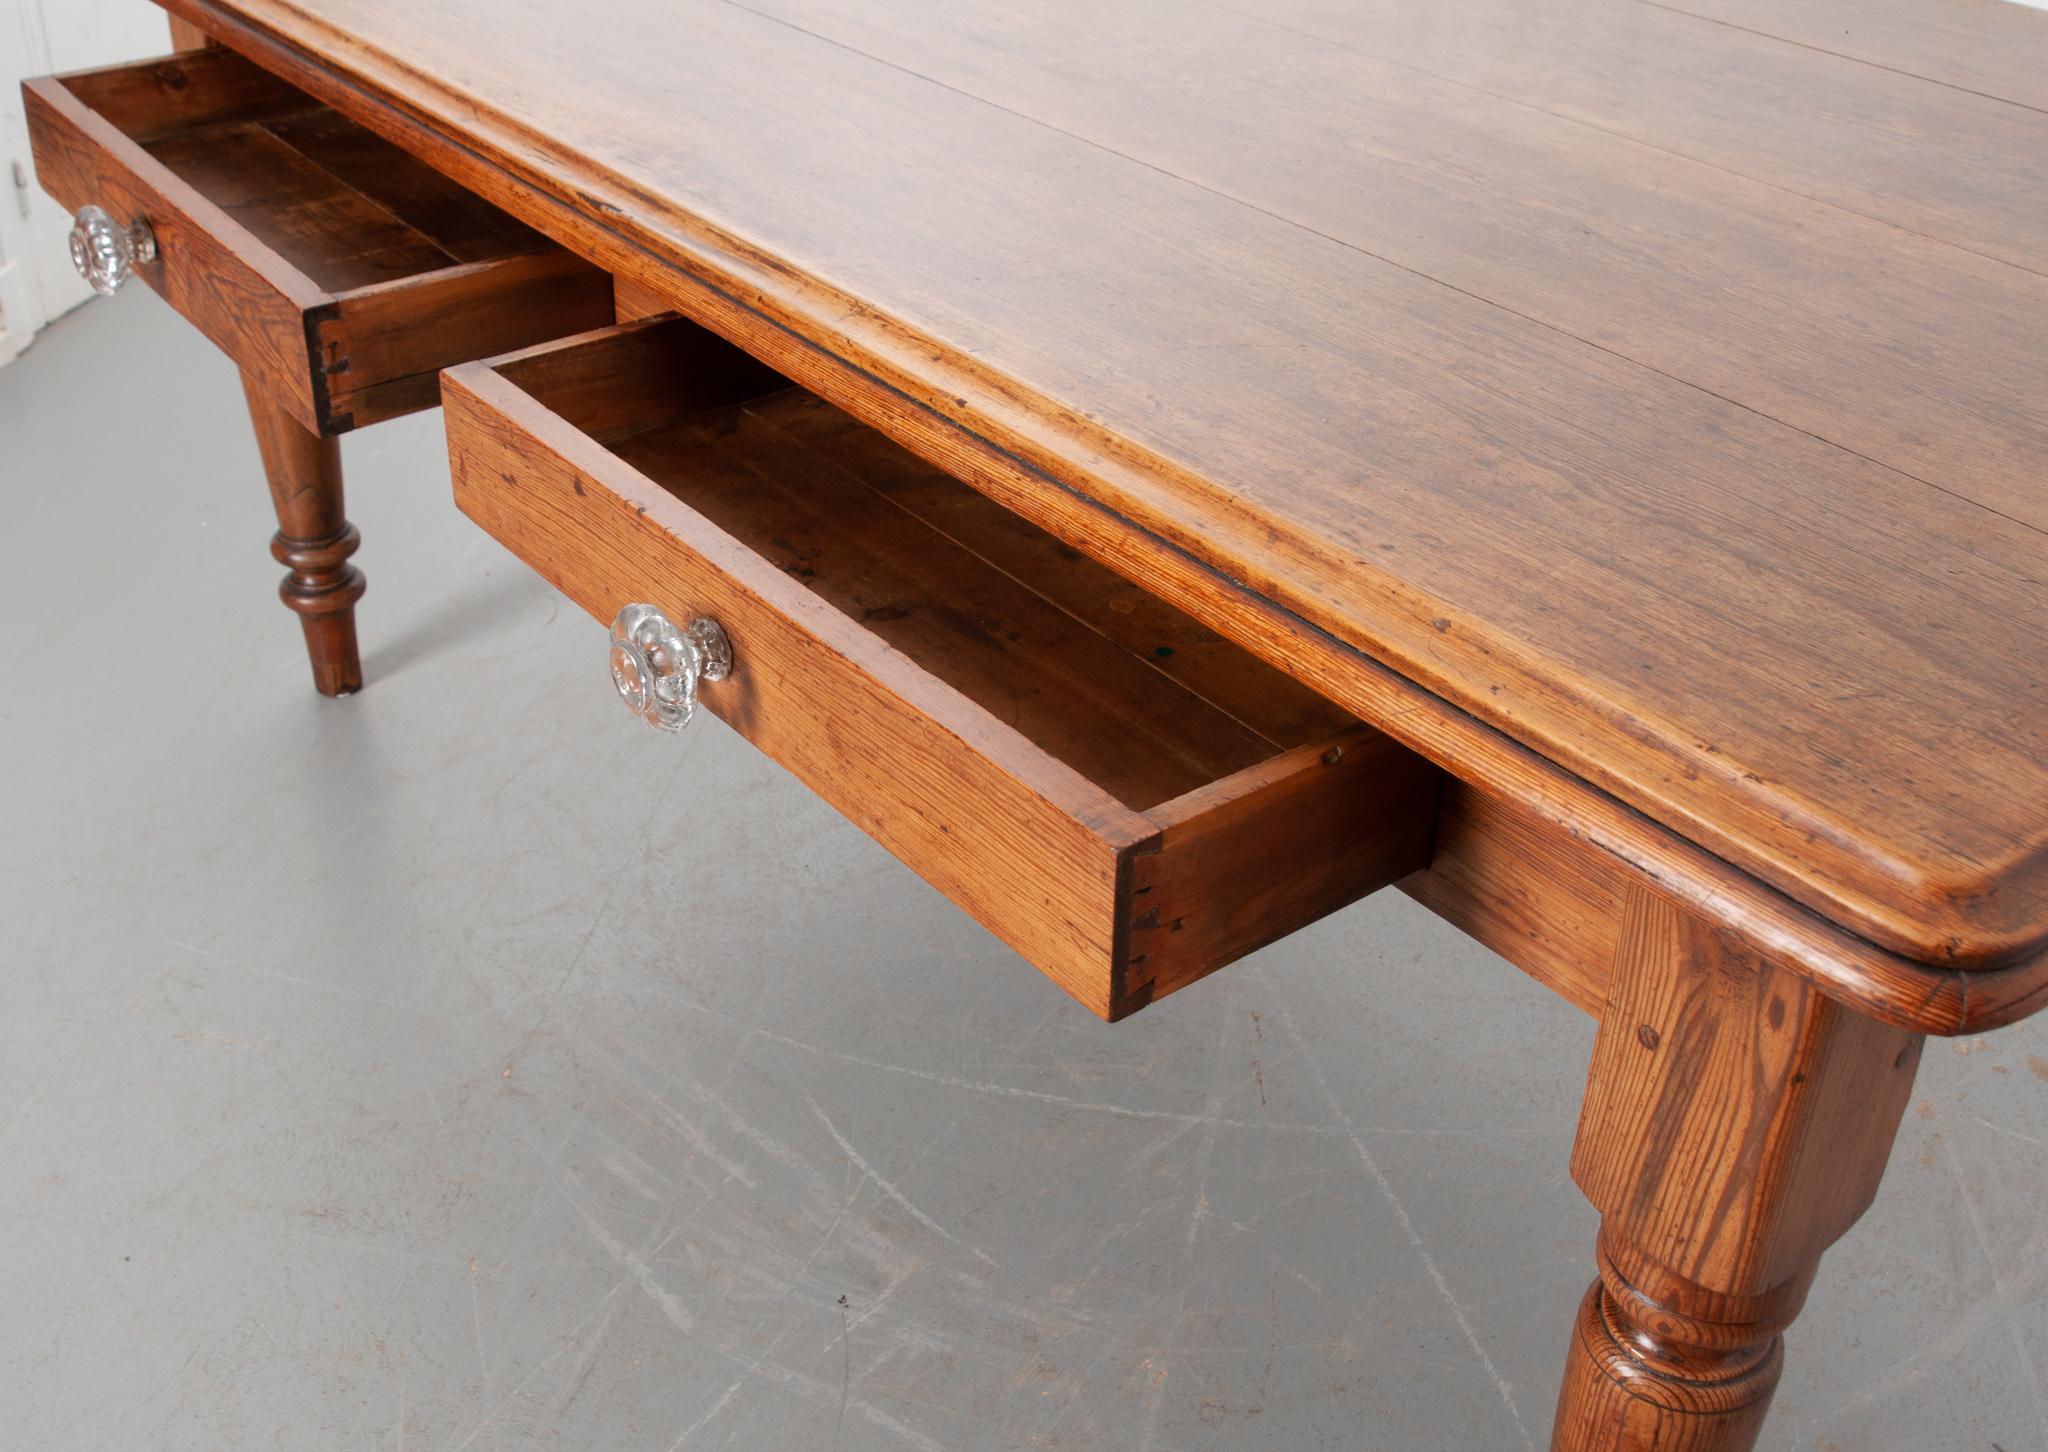 Turned English 19th Century Pine Farmhouse Table with Drawers